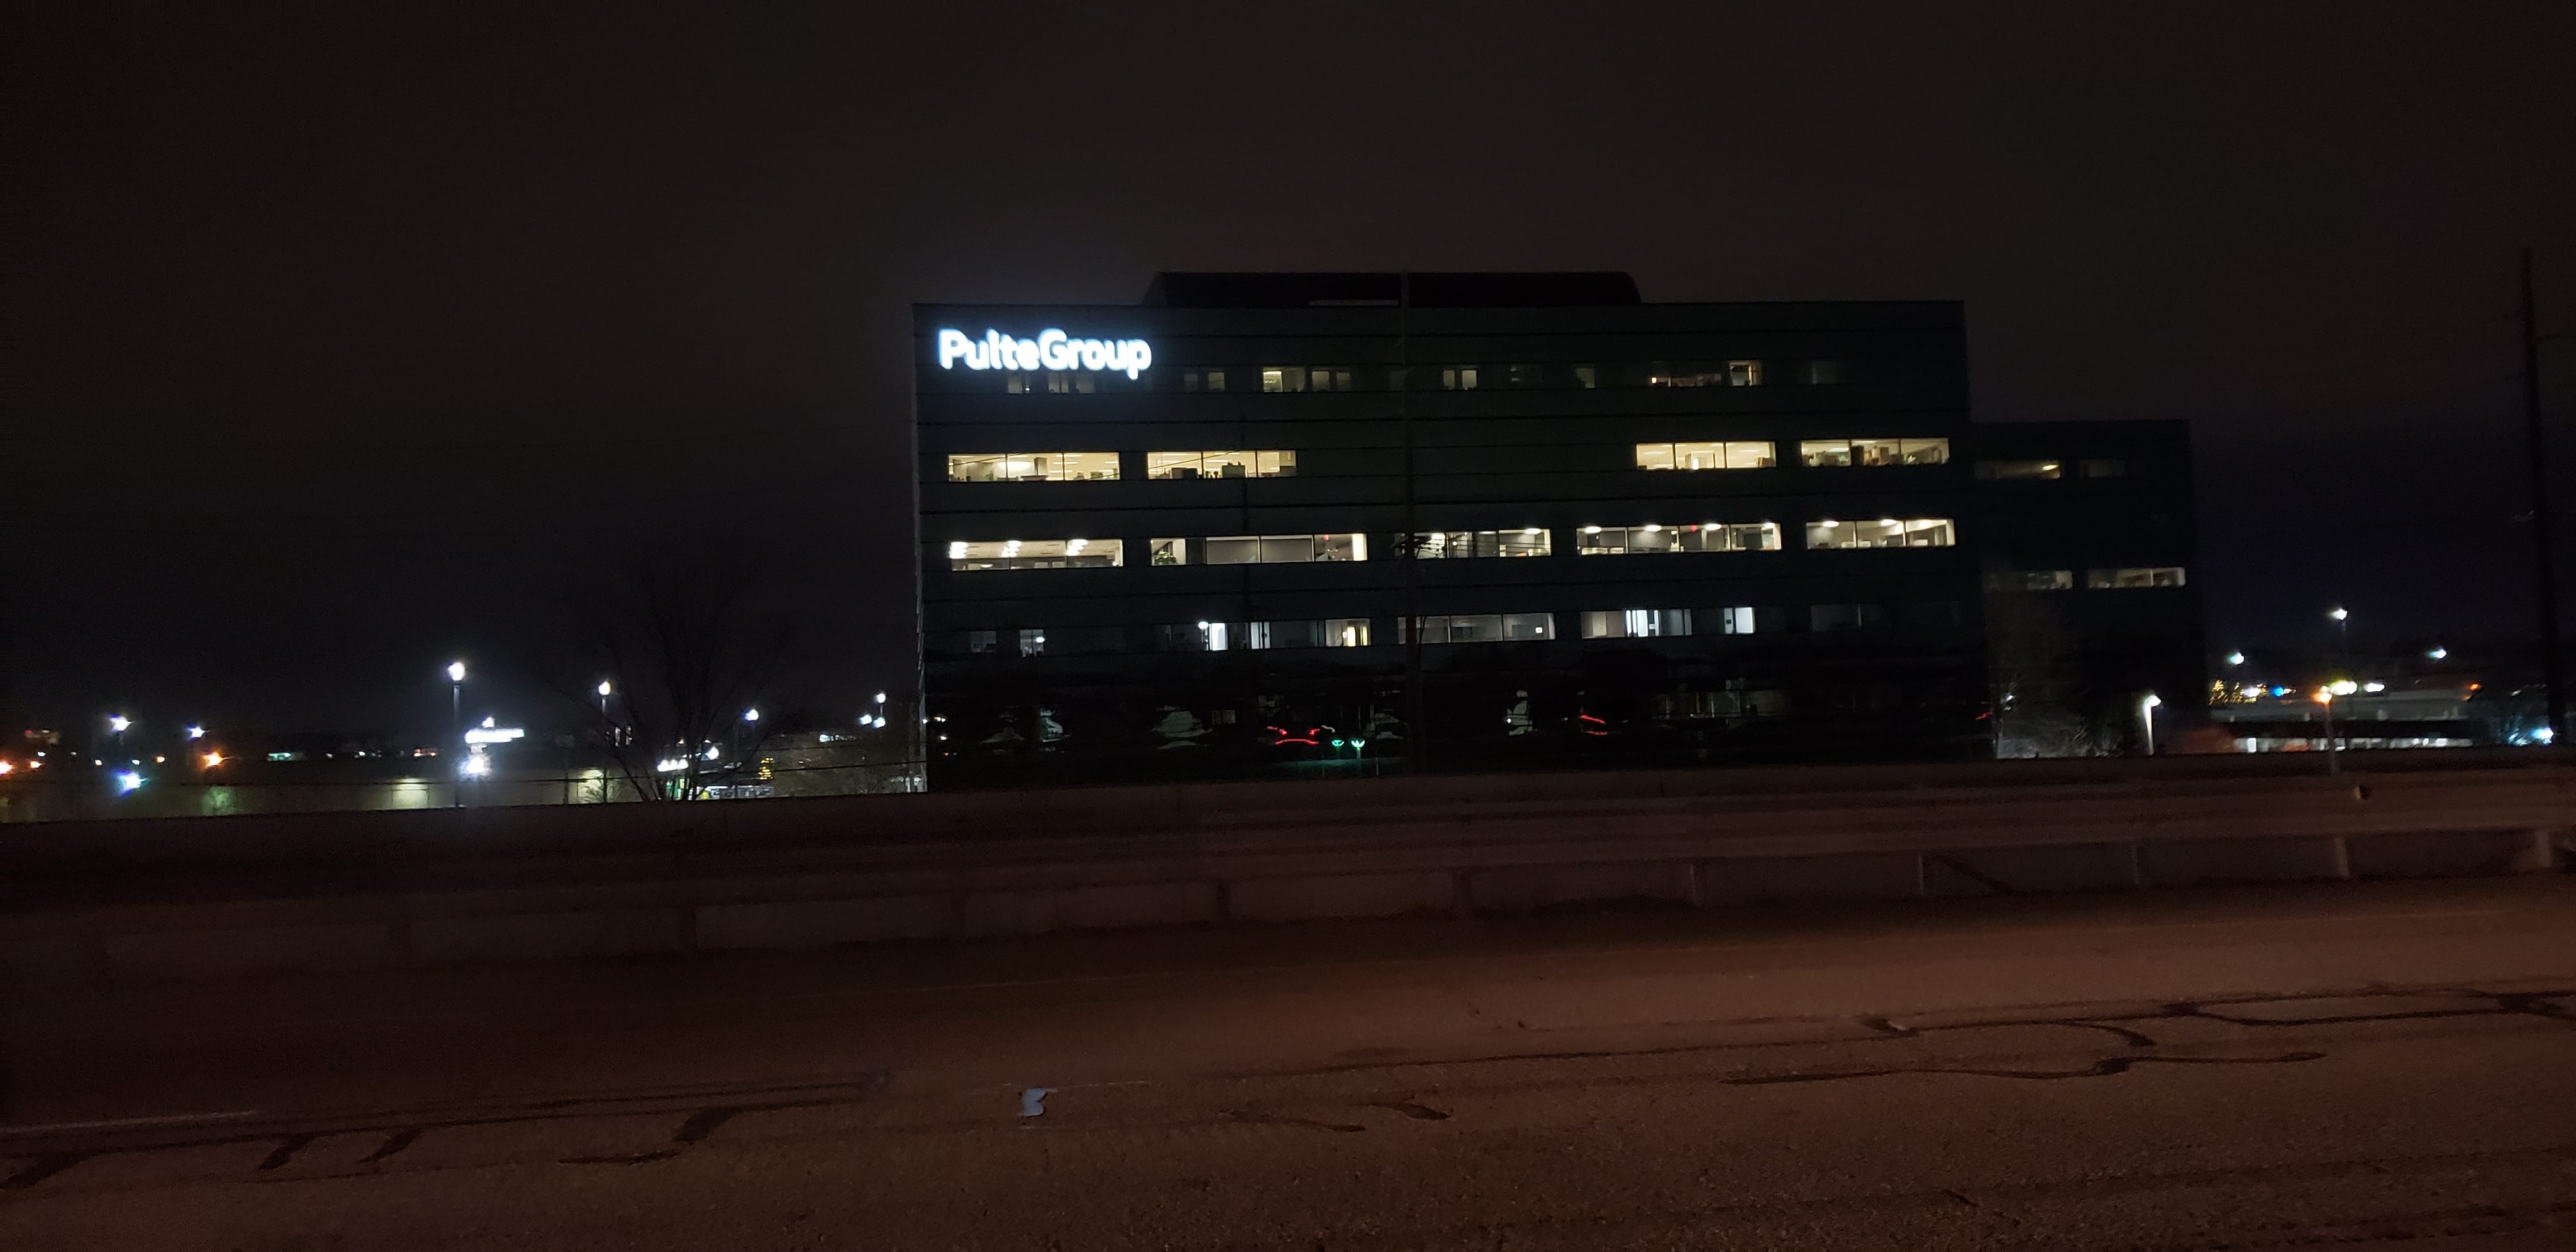 PulteGroup Channel Letters Illuminating night view